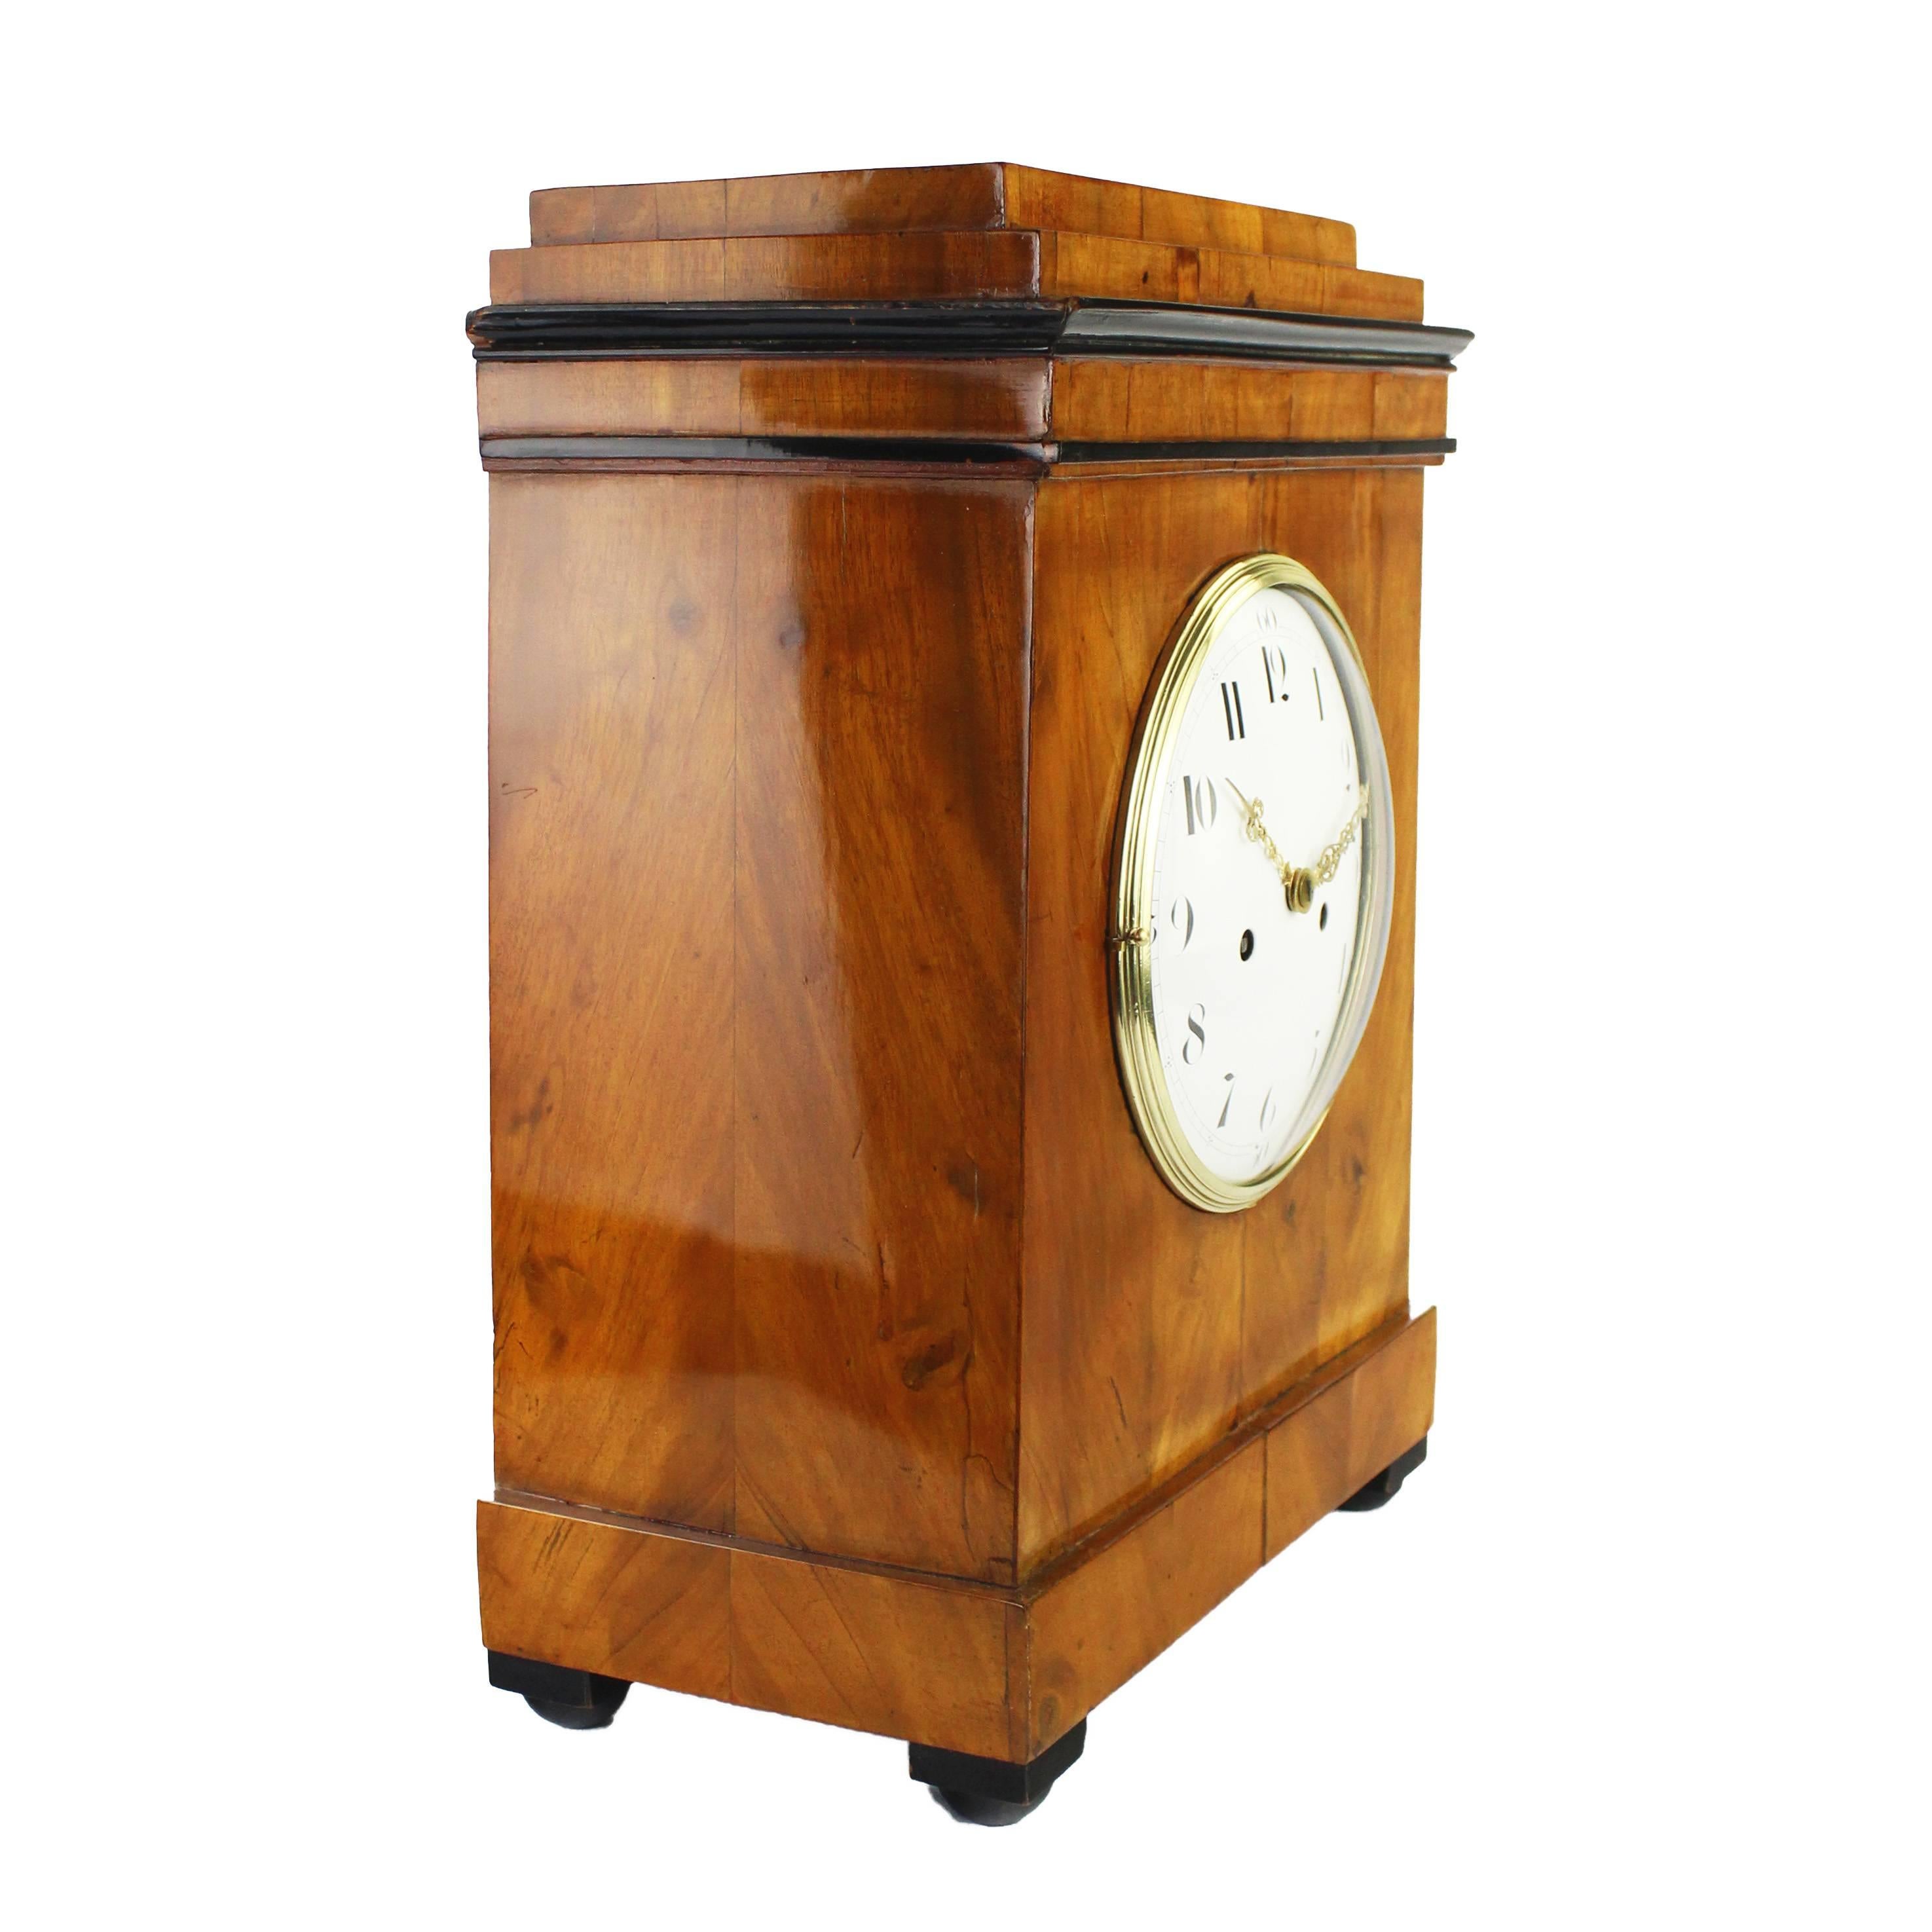 Table clock.
Walnut-tree veneer,
circa 1830.
Case with conical form
ebonized parts
enamel dial
weekly runner.
French shellac hand polish.
Restored state.
Measures: Height 48.5 cm, width 35 cm, depth 20 cm.

I provide for packing of the